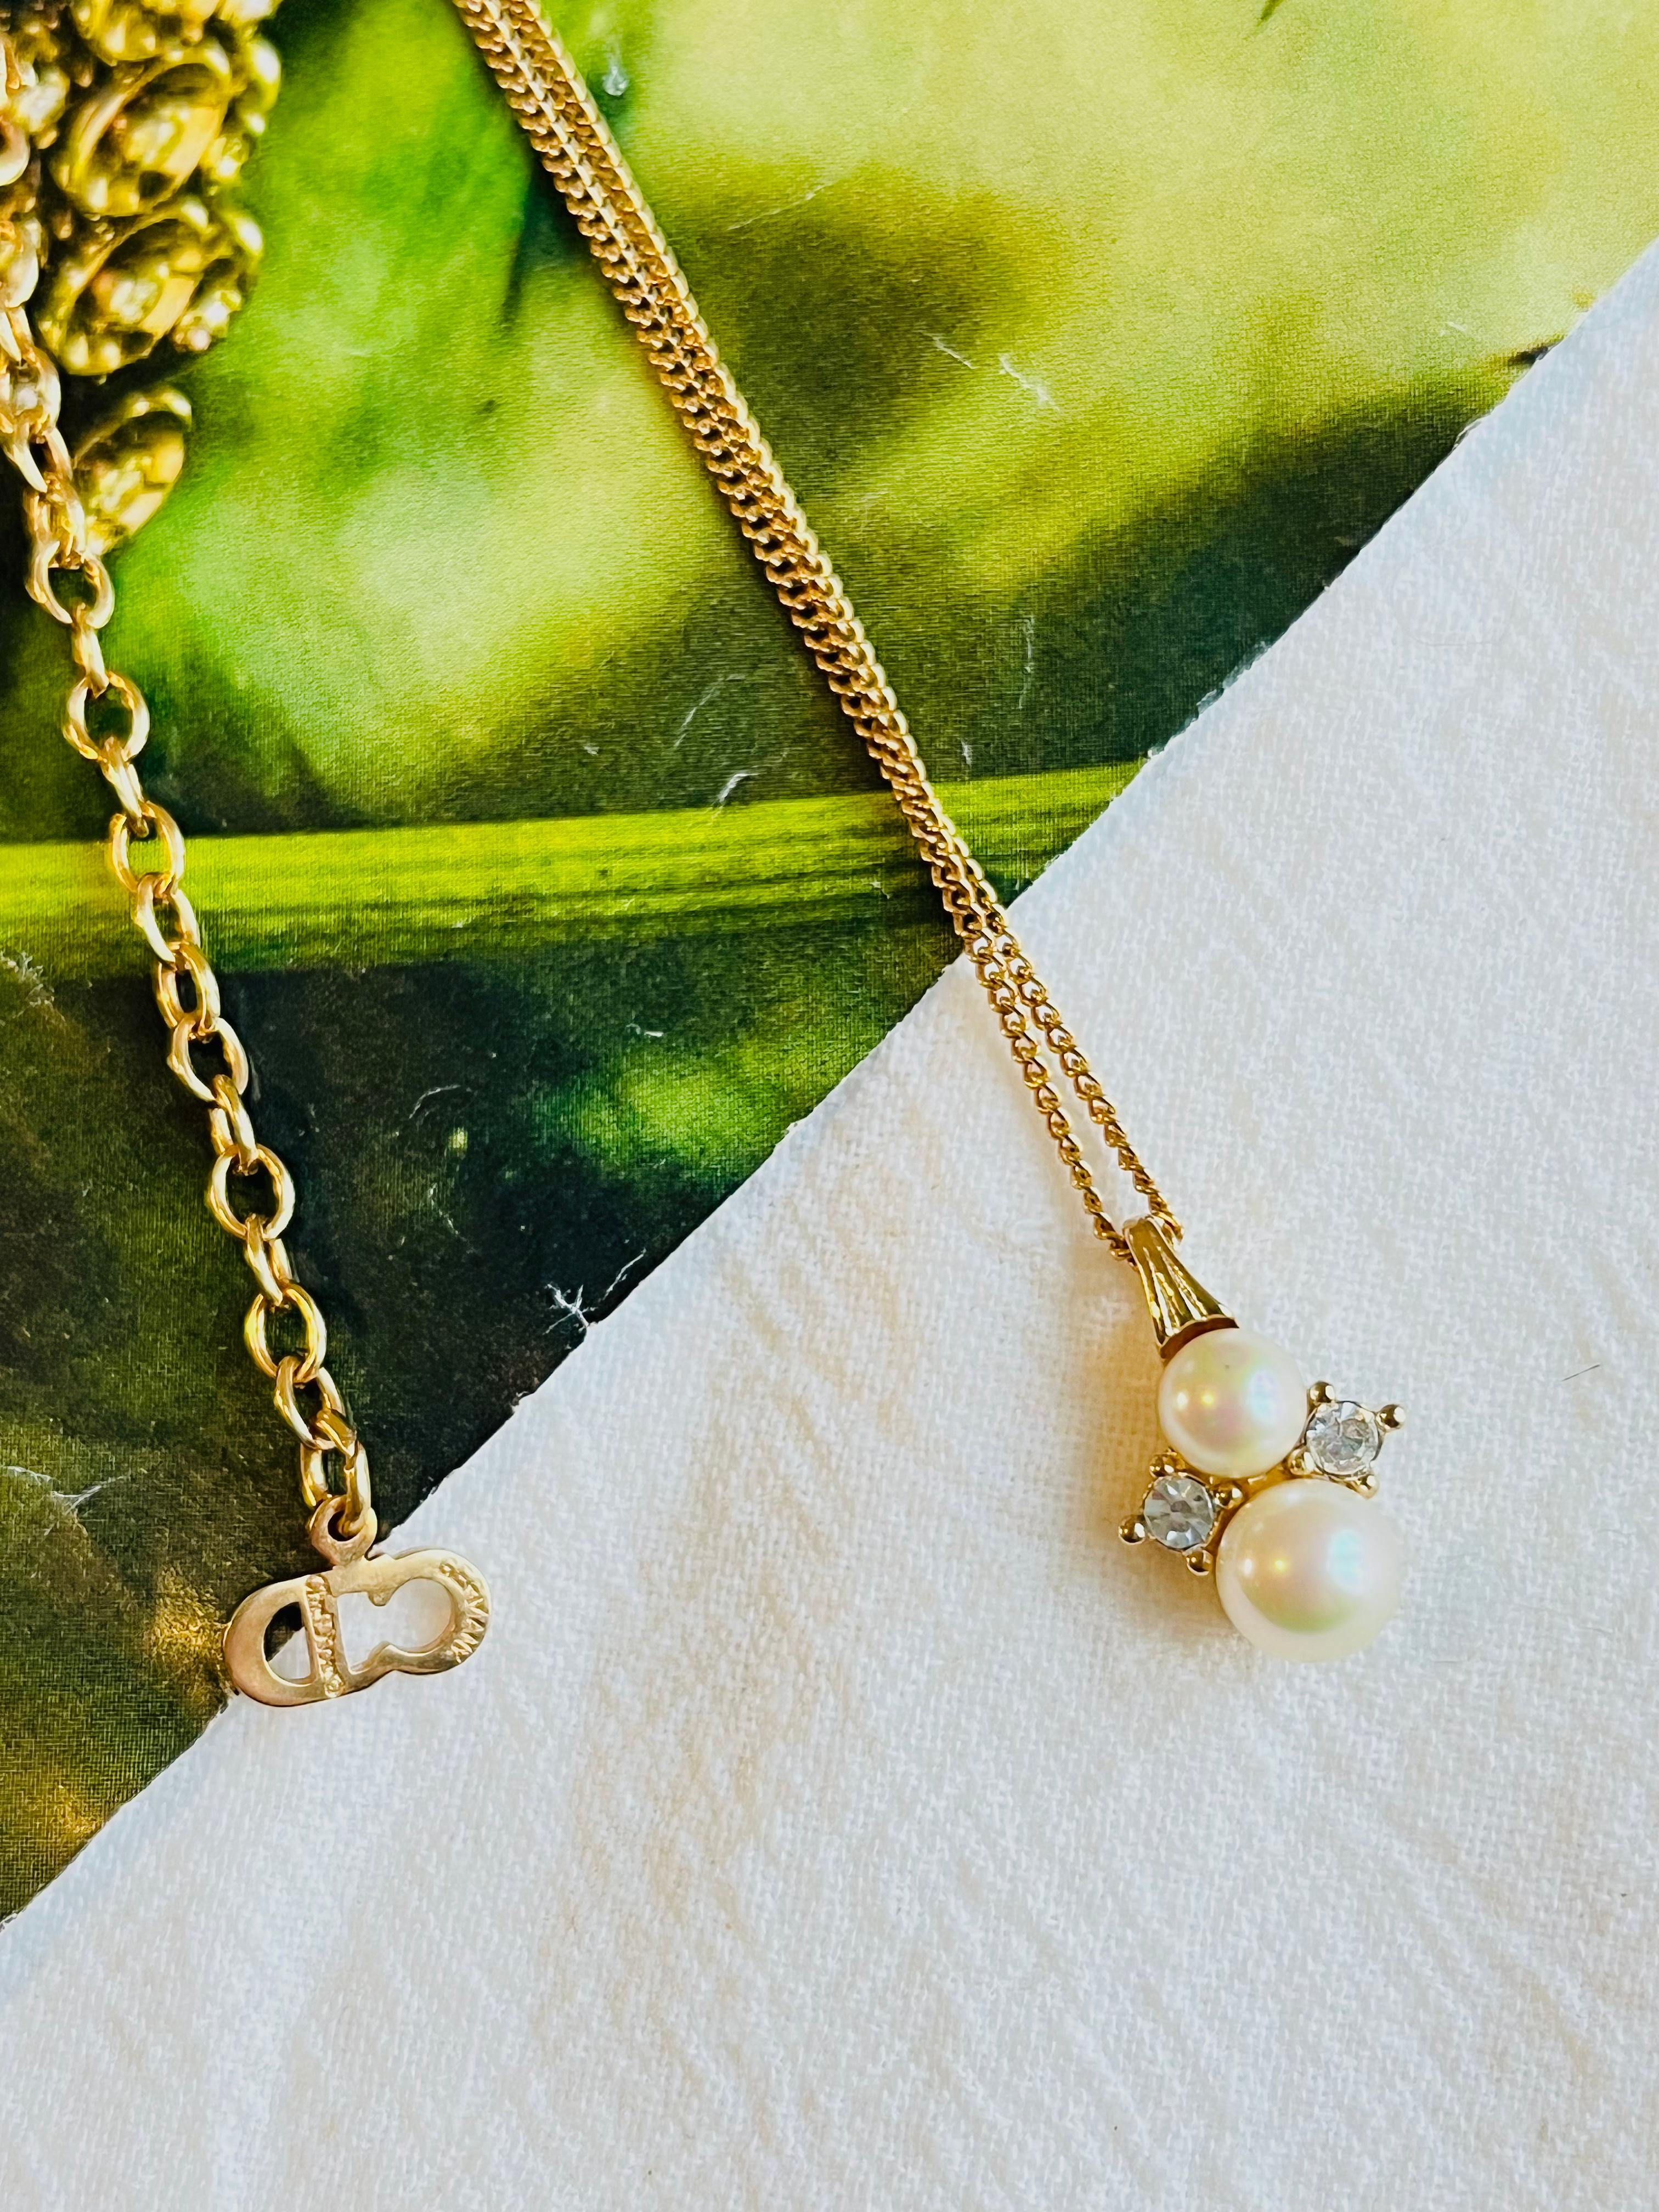 Christian Dior Vintage 1980s Double Pearls Crystals Gold Elegant Chain Necklace  In Excellent Condition For Sale In Wokingham, England